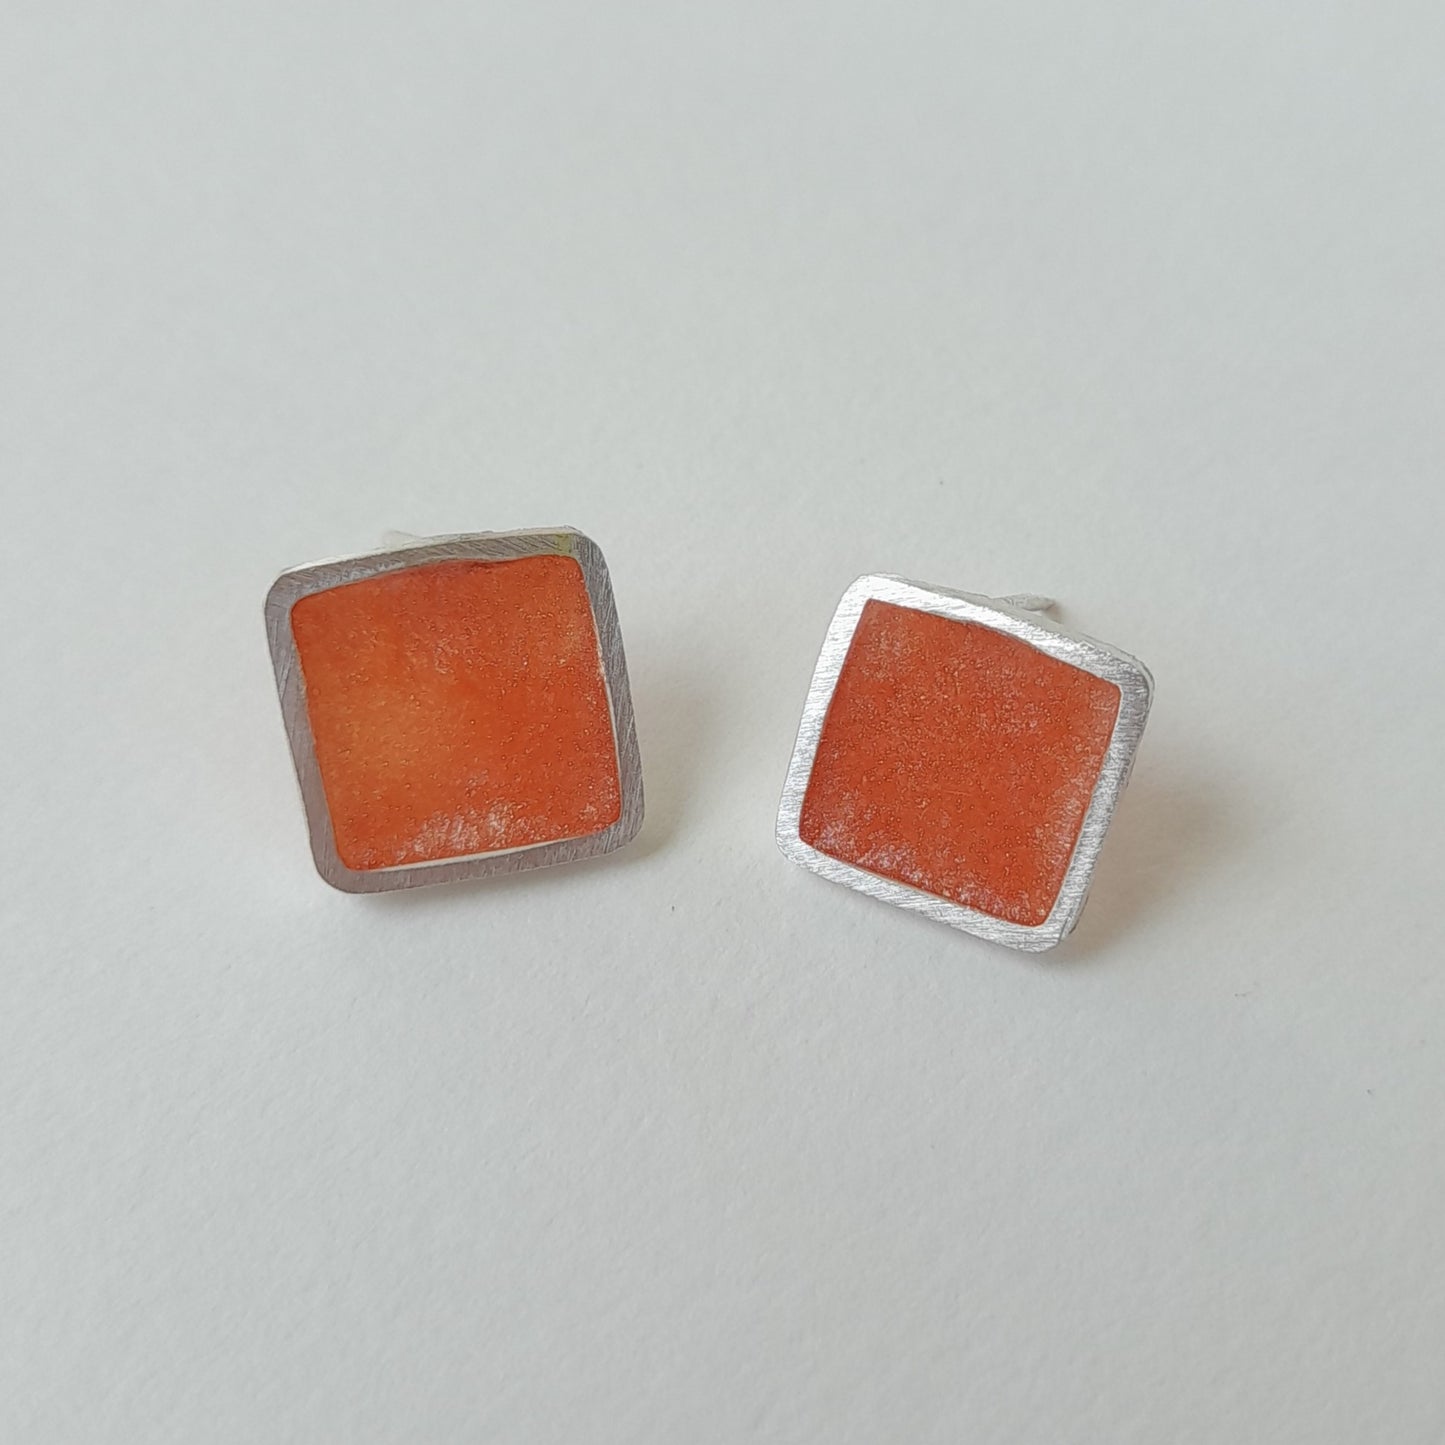 Fine silver and resin square studs